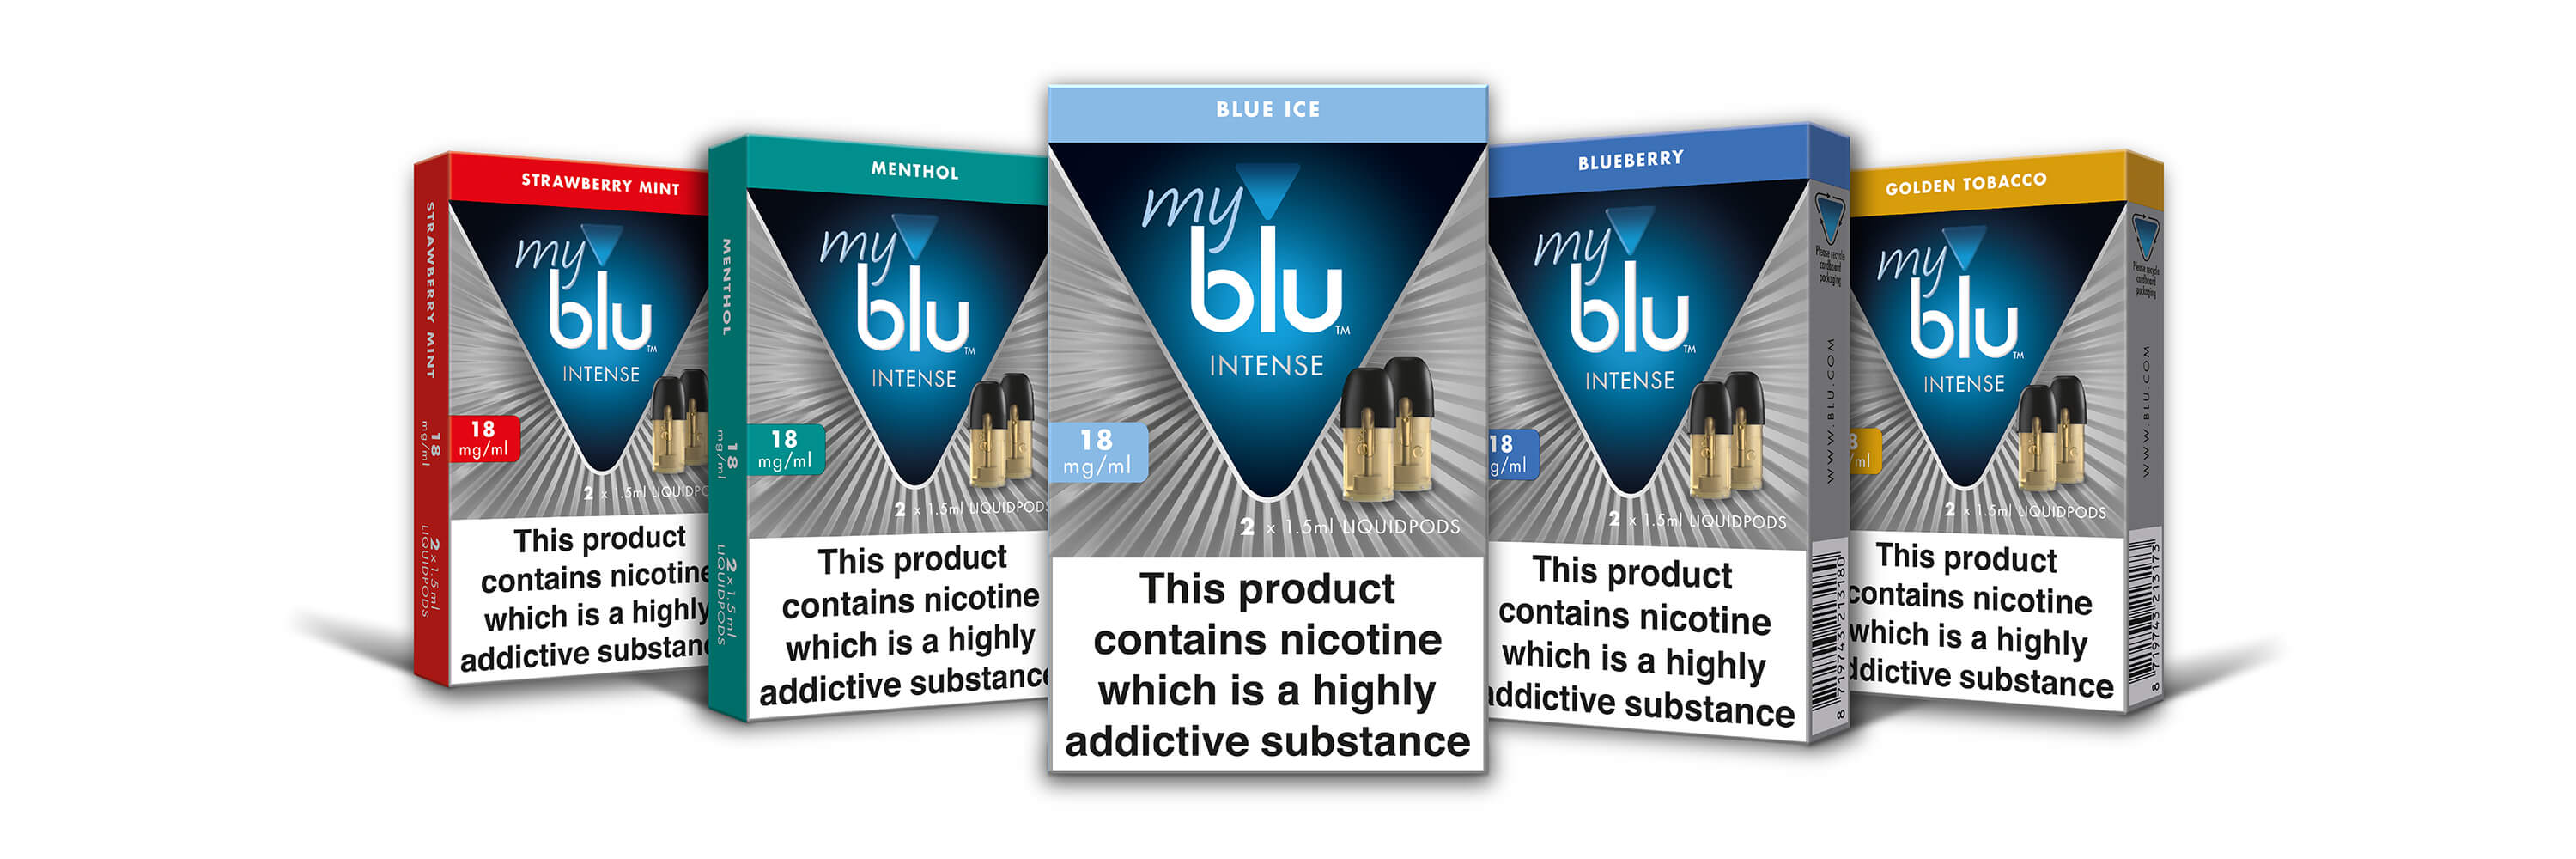 new intense with blue ice